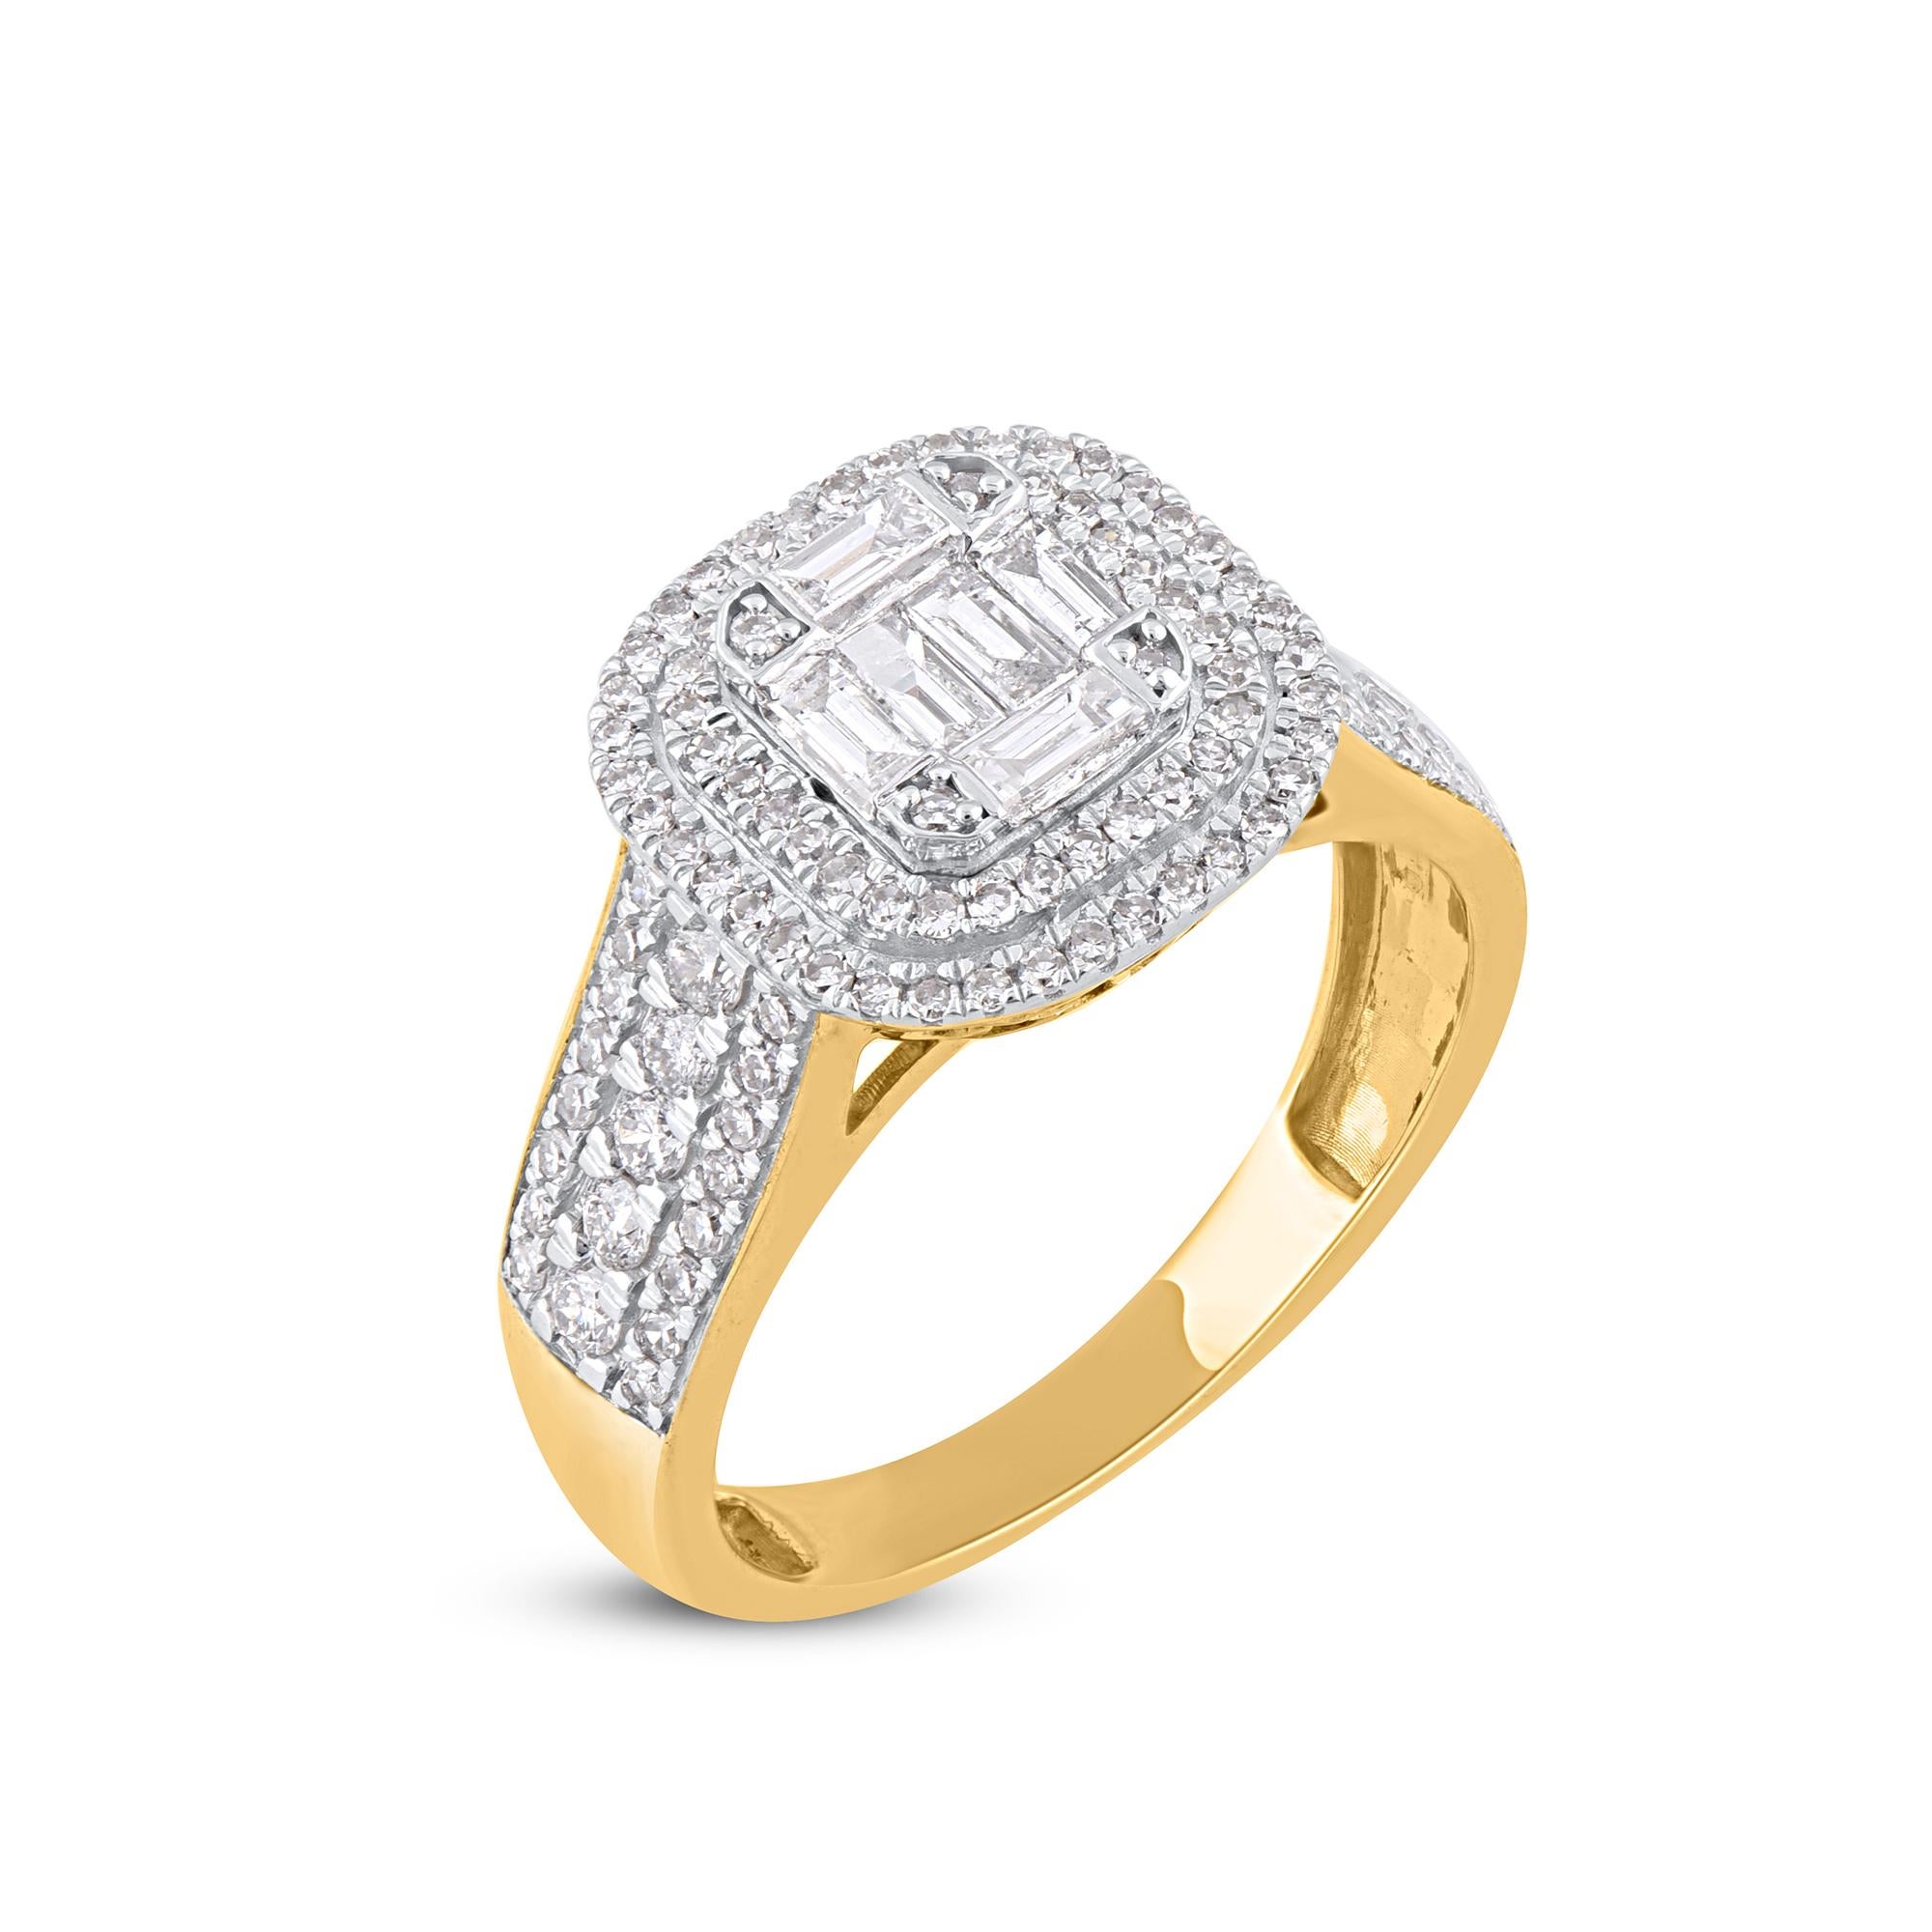 Honor your special day with this exceptional diamond band ring. This band ring features a sparkling 120 brilliant cut, single cut round diamonds and baguette cut diamonds beautifully set in prong, pave and channel setting. The total diamond weight